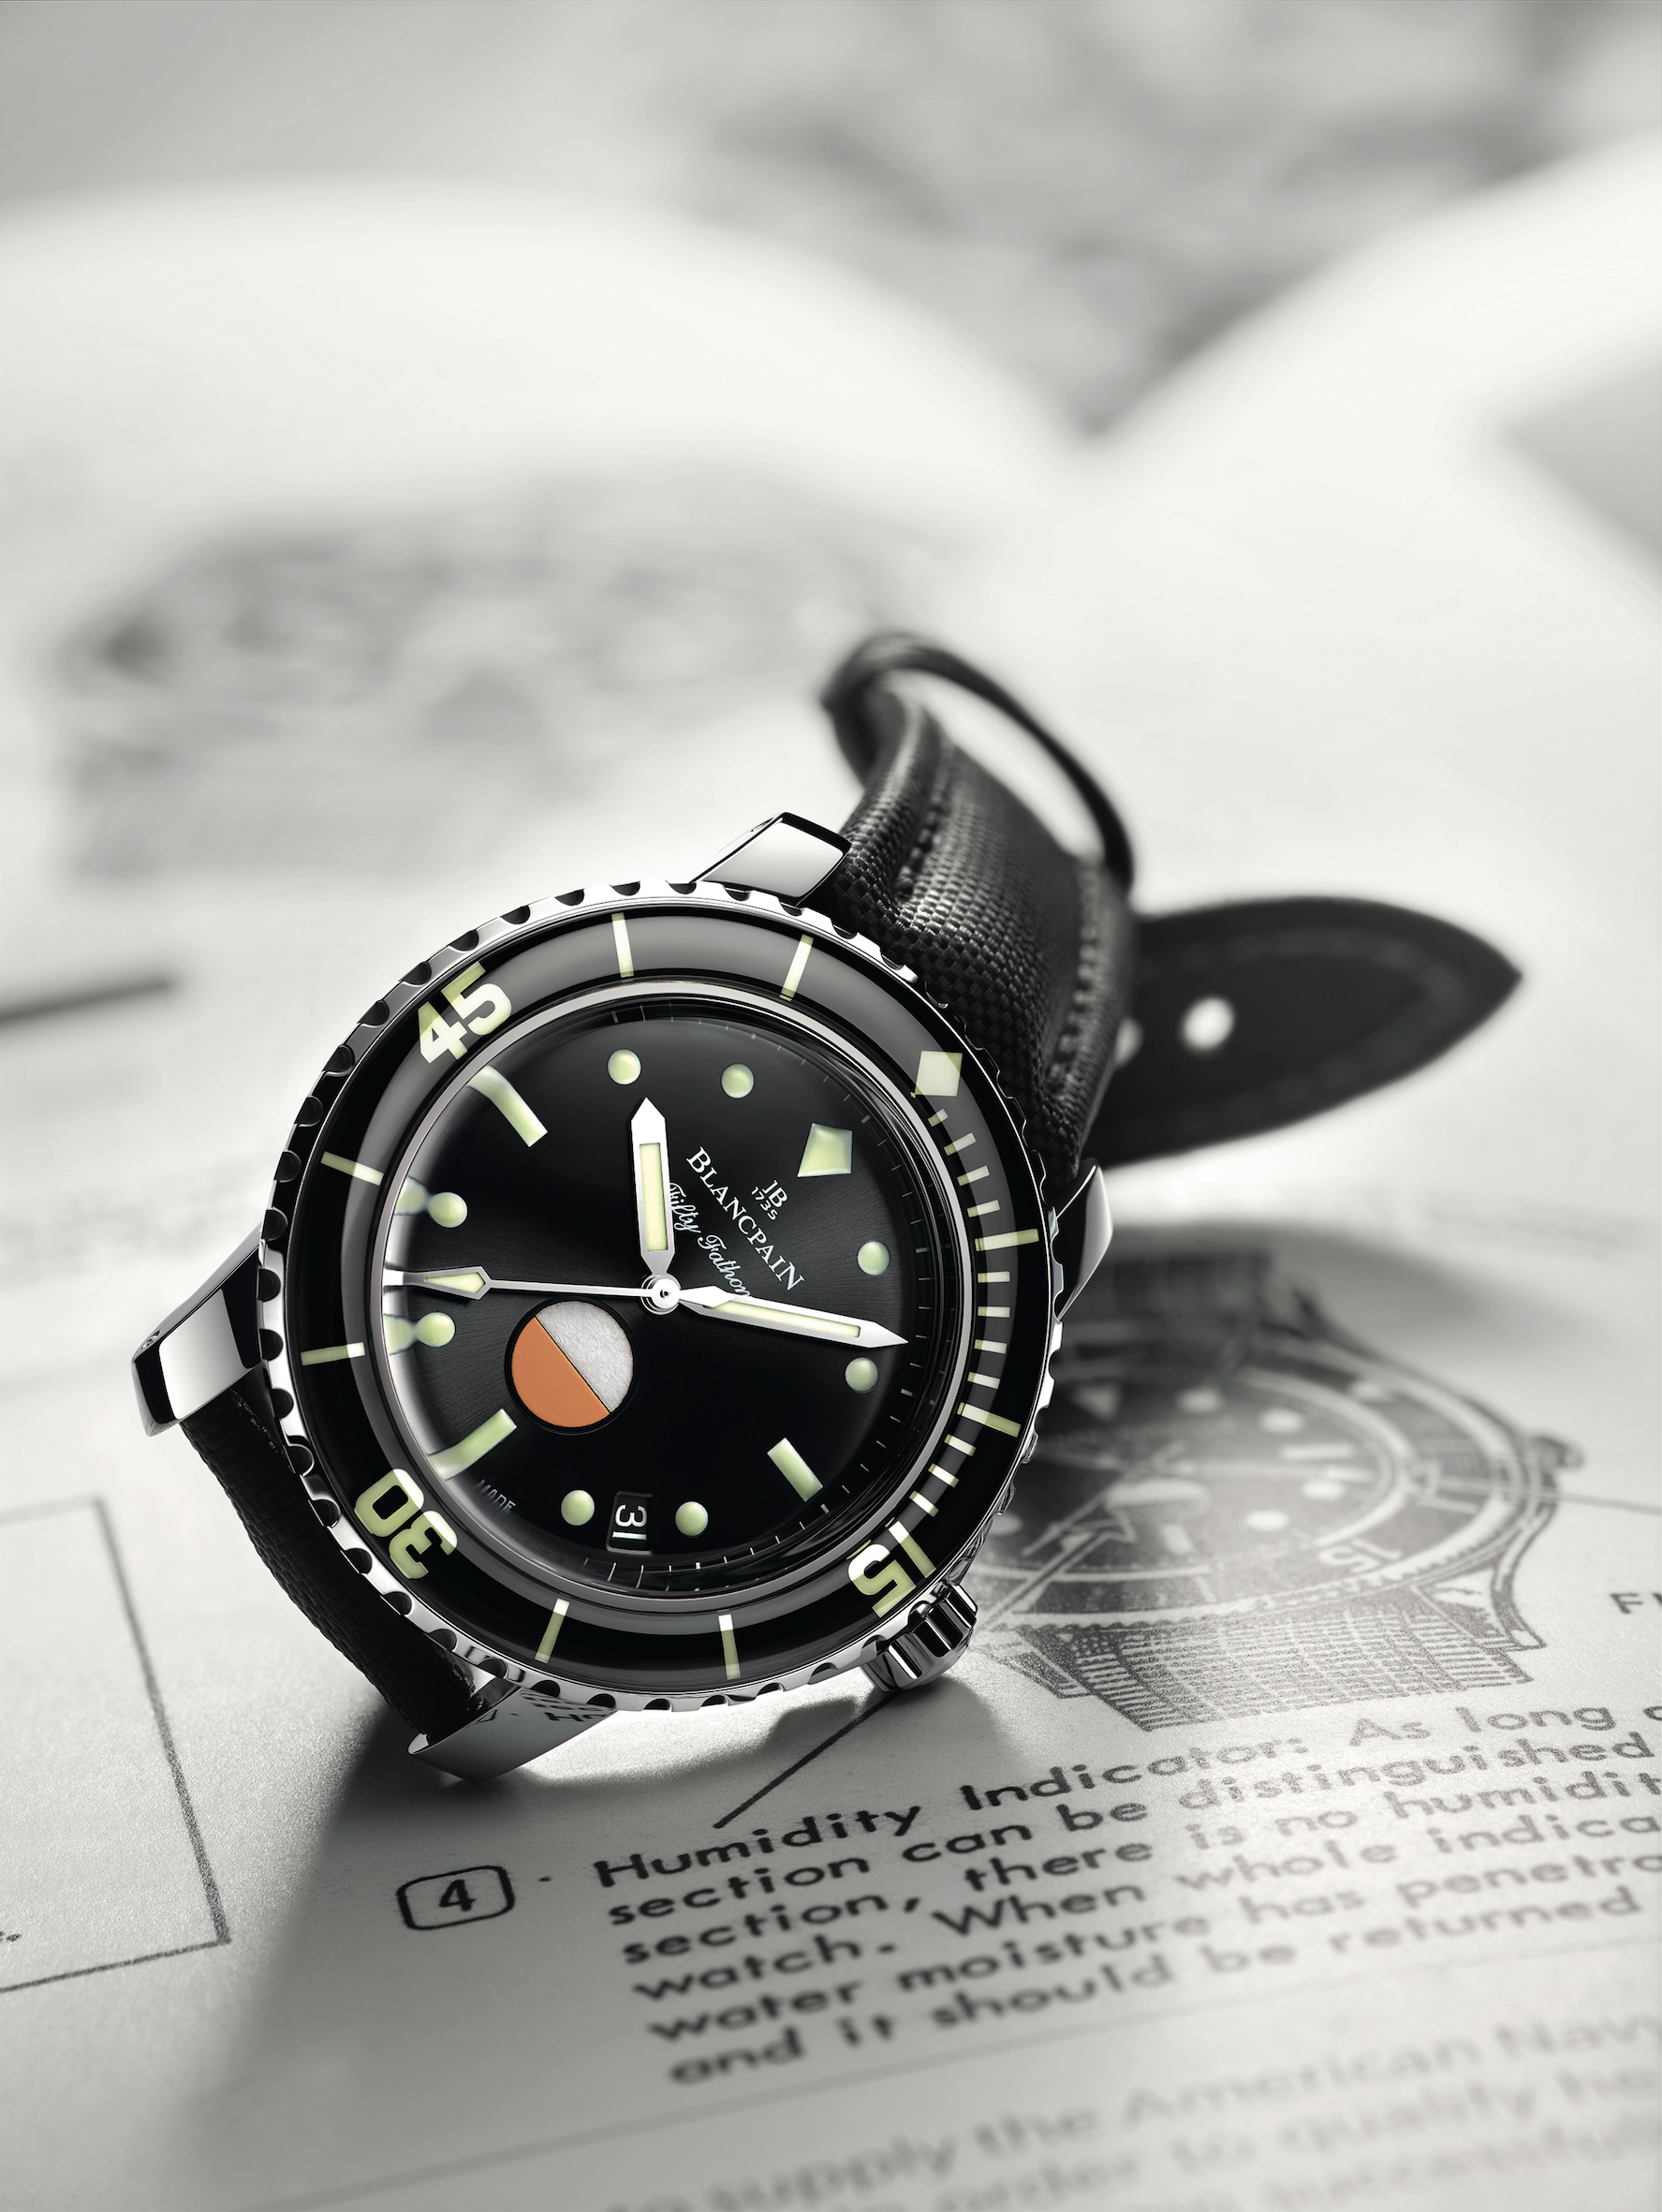 Blancpain Tribute to Fifty Fathoms MIL-SPEC